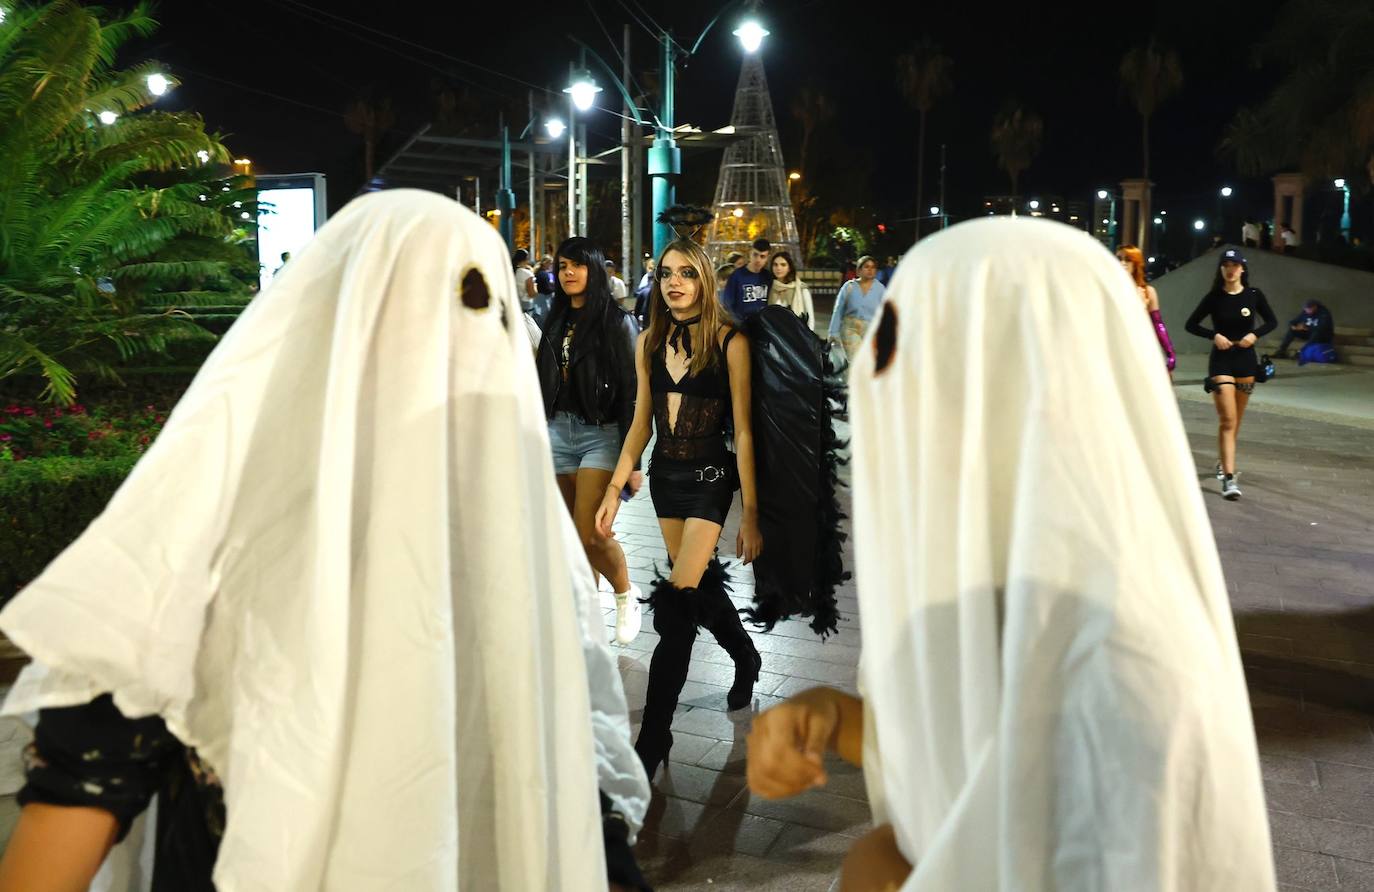 Halloween in the centre of Malaga.